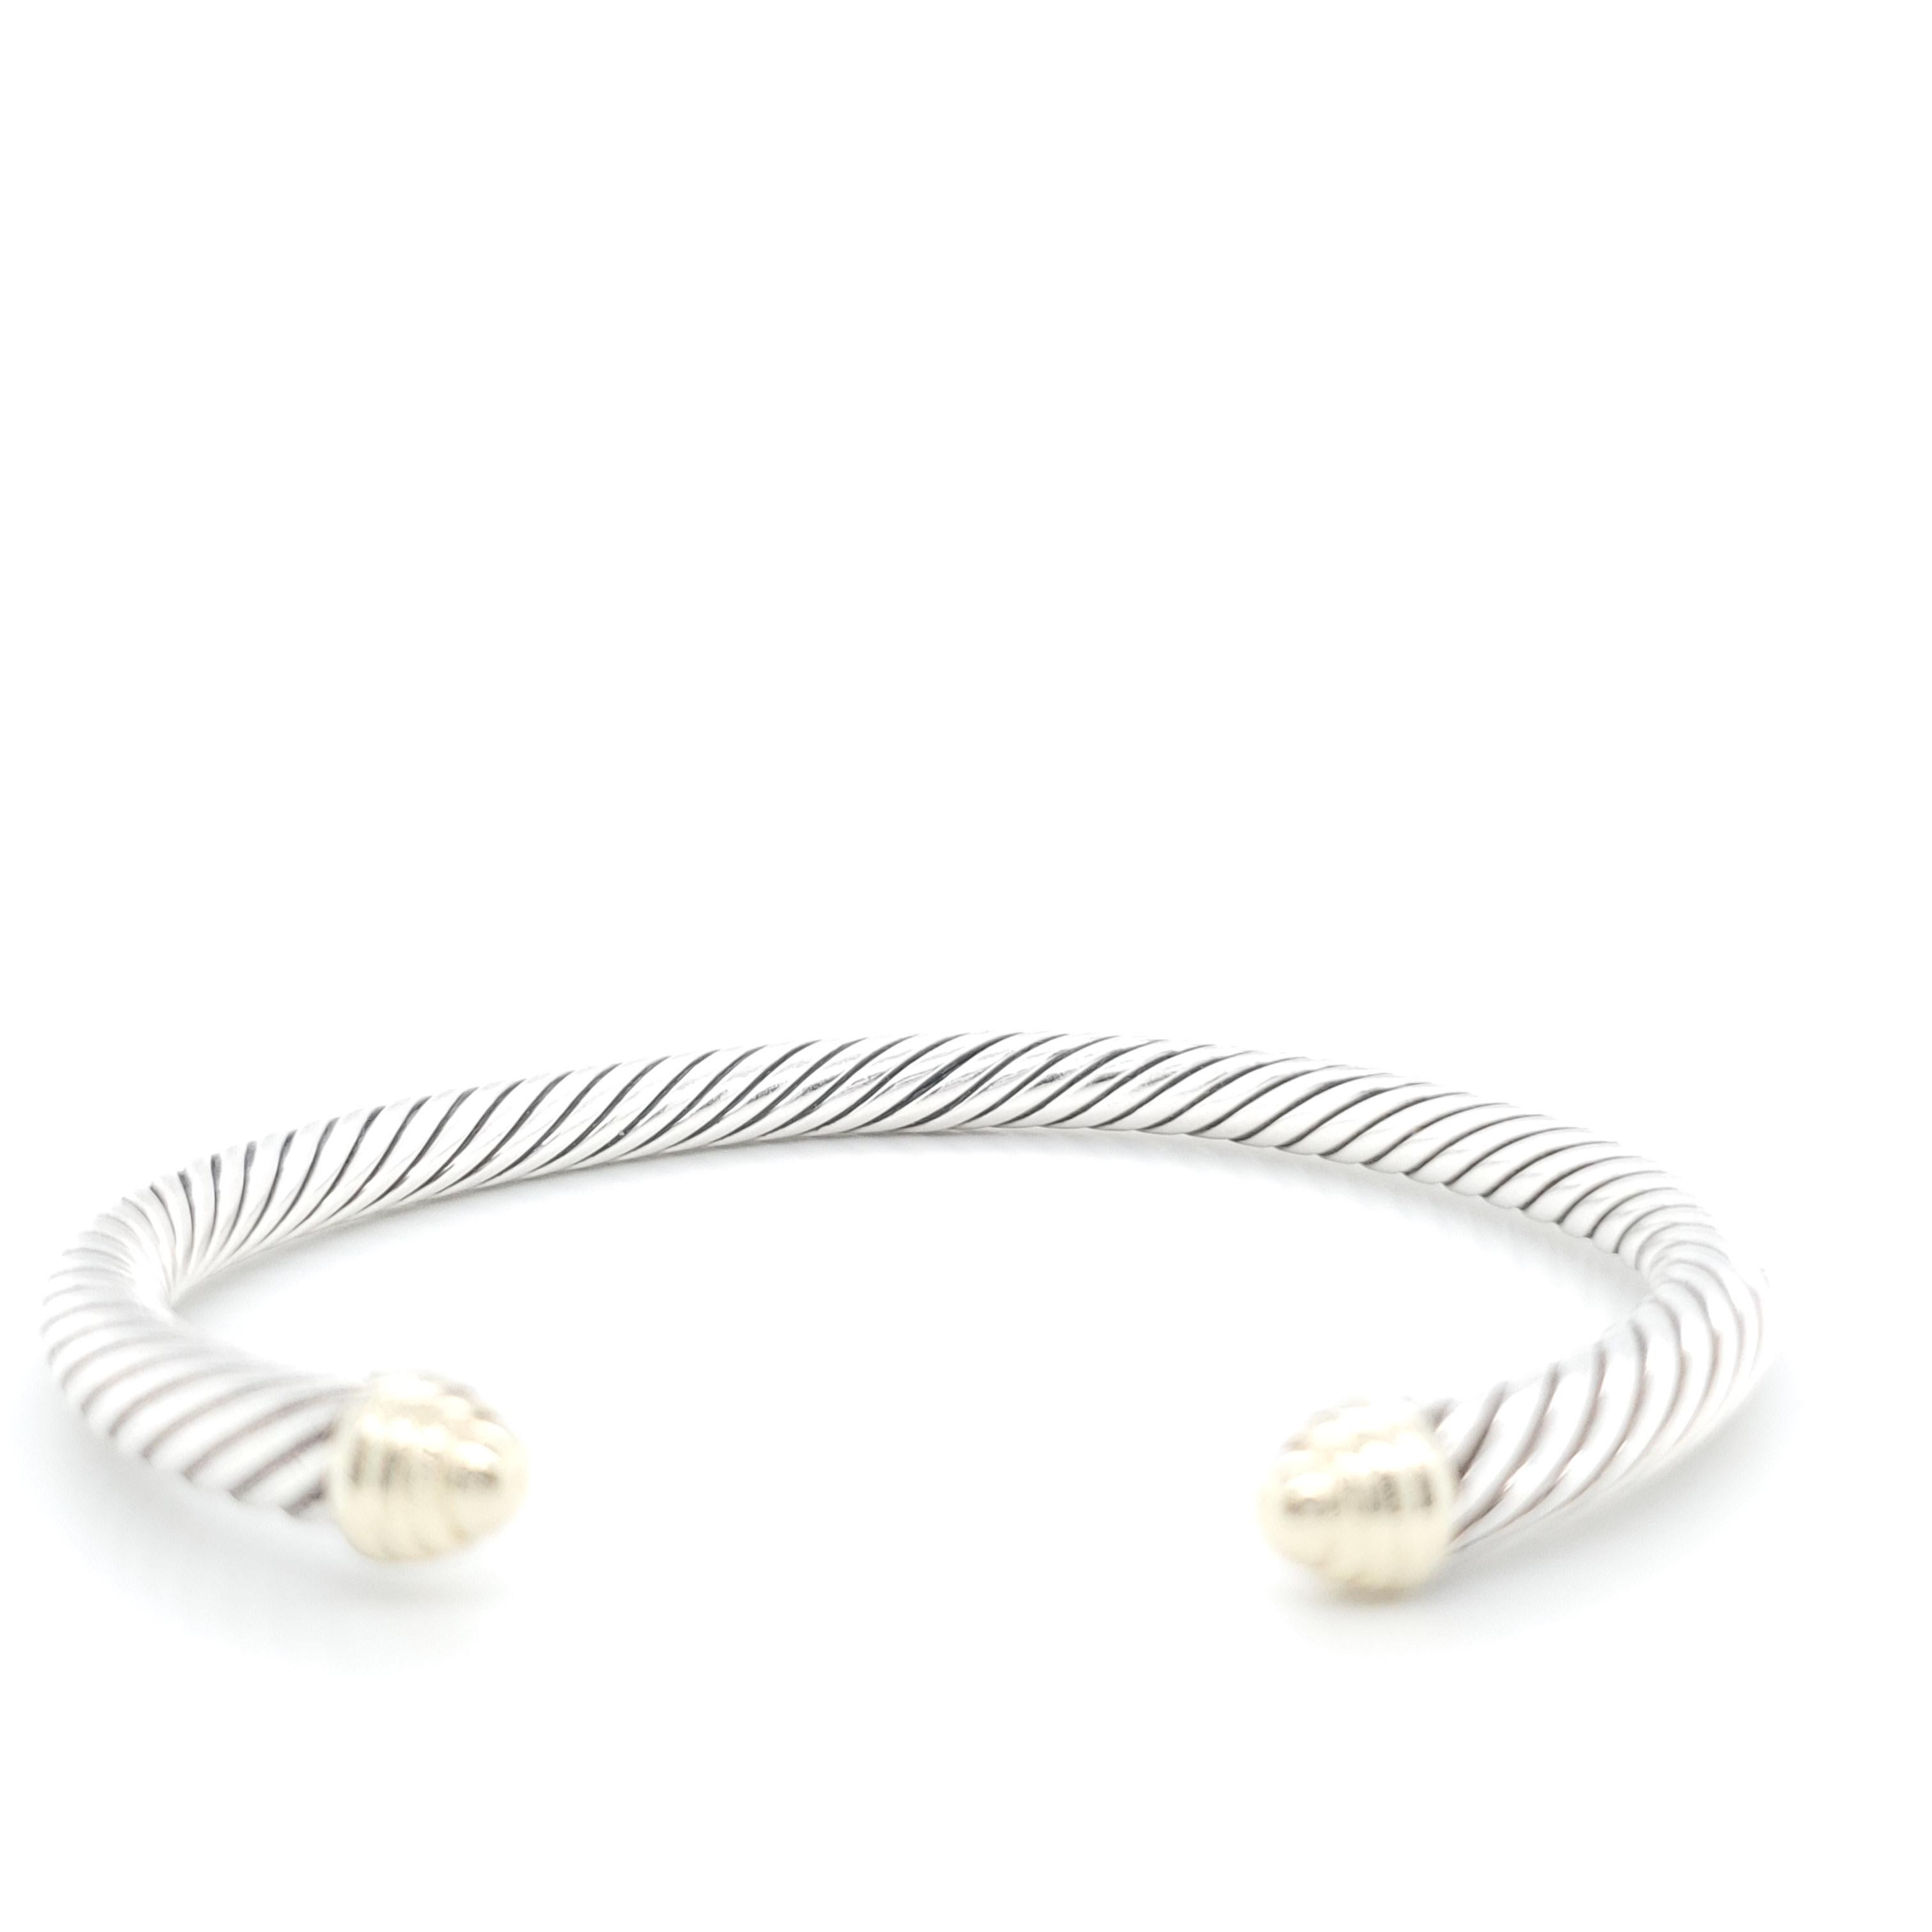 Authentic David Yurman sterling silver cable open cuff bangle with 14 karat yellow gold accent at each end. Cable is 5mm in width and the bangle measures 7 inches in diameter. Signed D.Y. 585 925. Condition issue: Bangle is bent out of round. Does